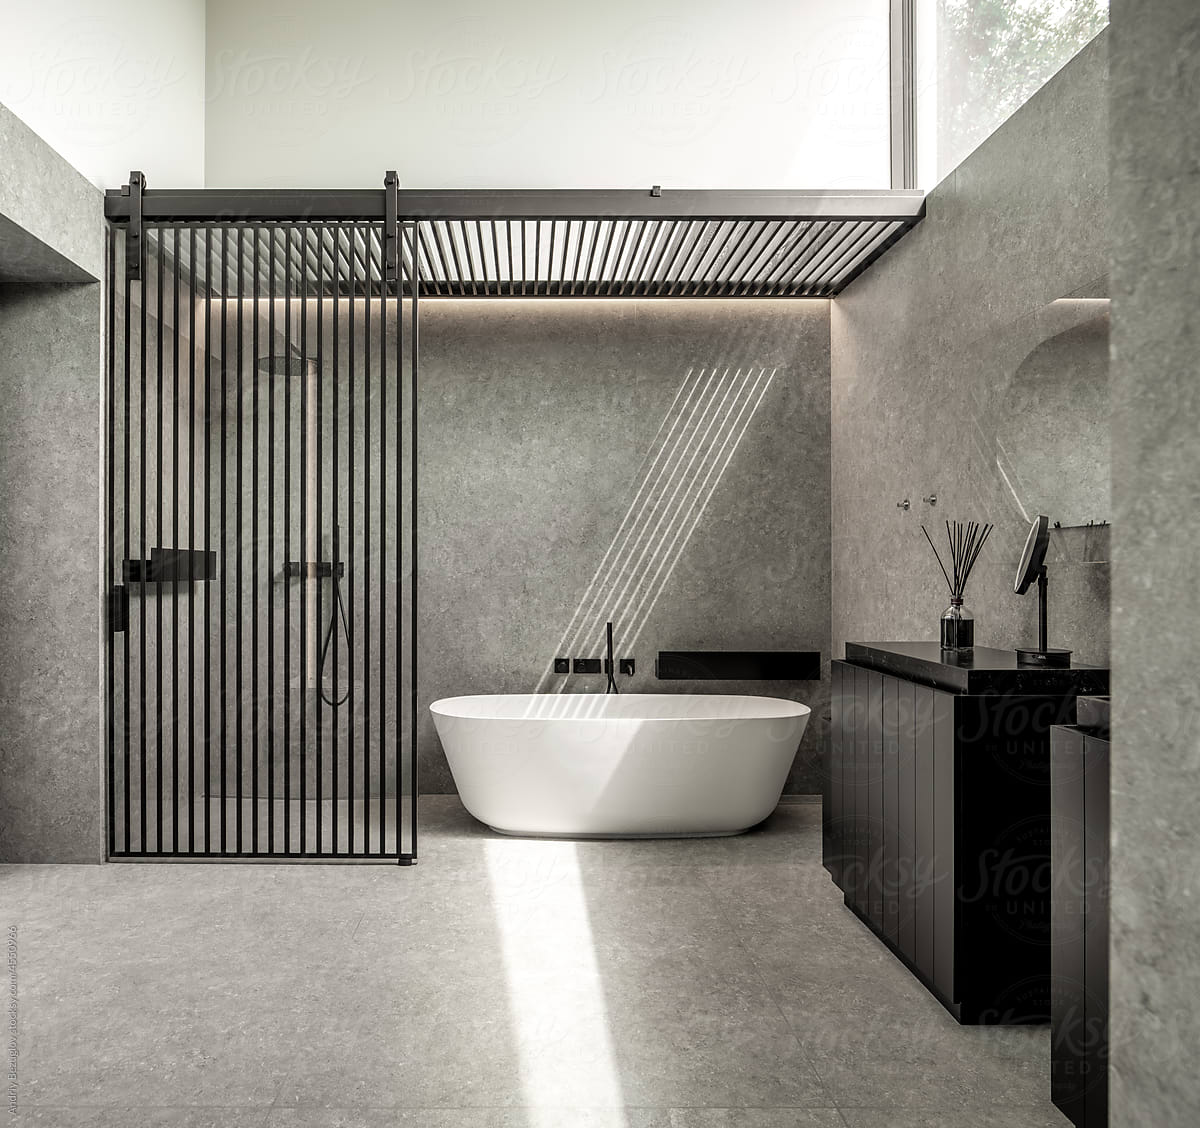 Interior of contemporary bathroom with tiled walls